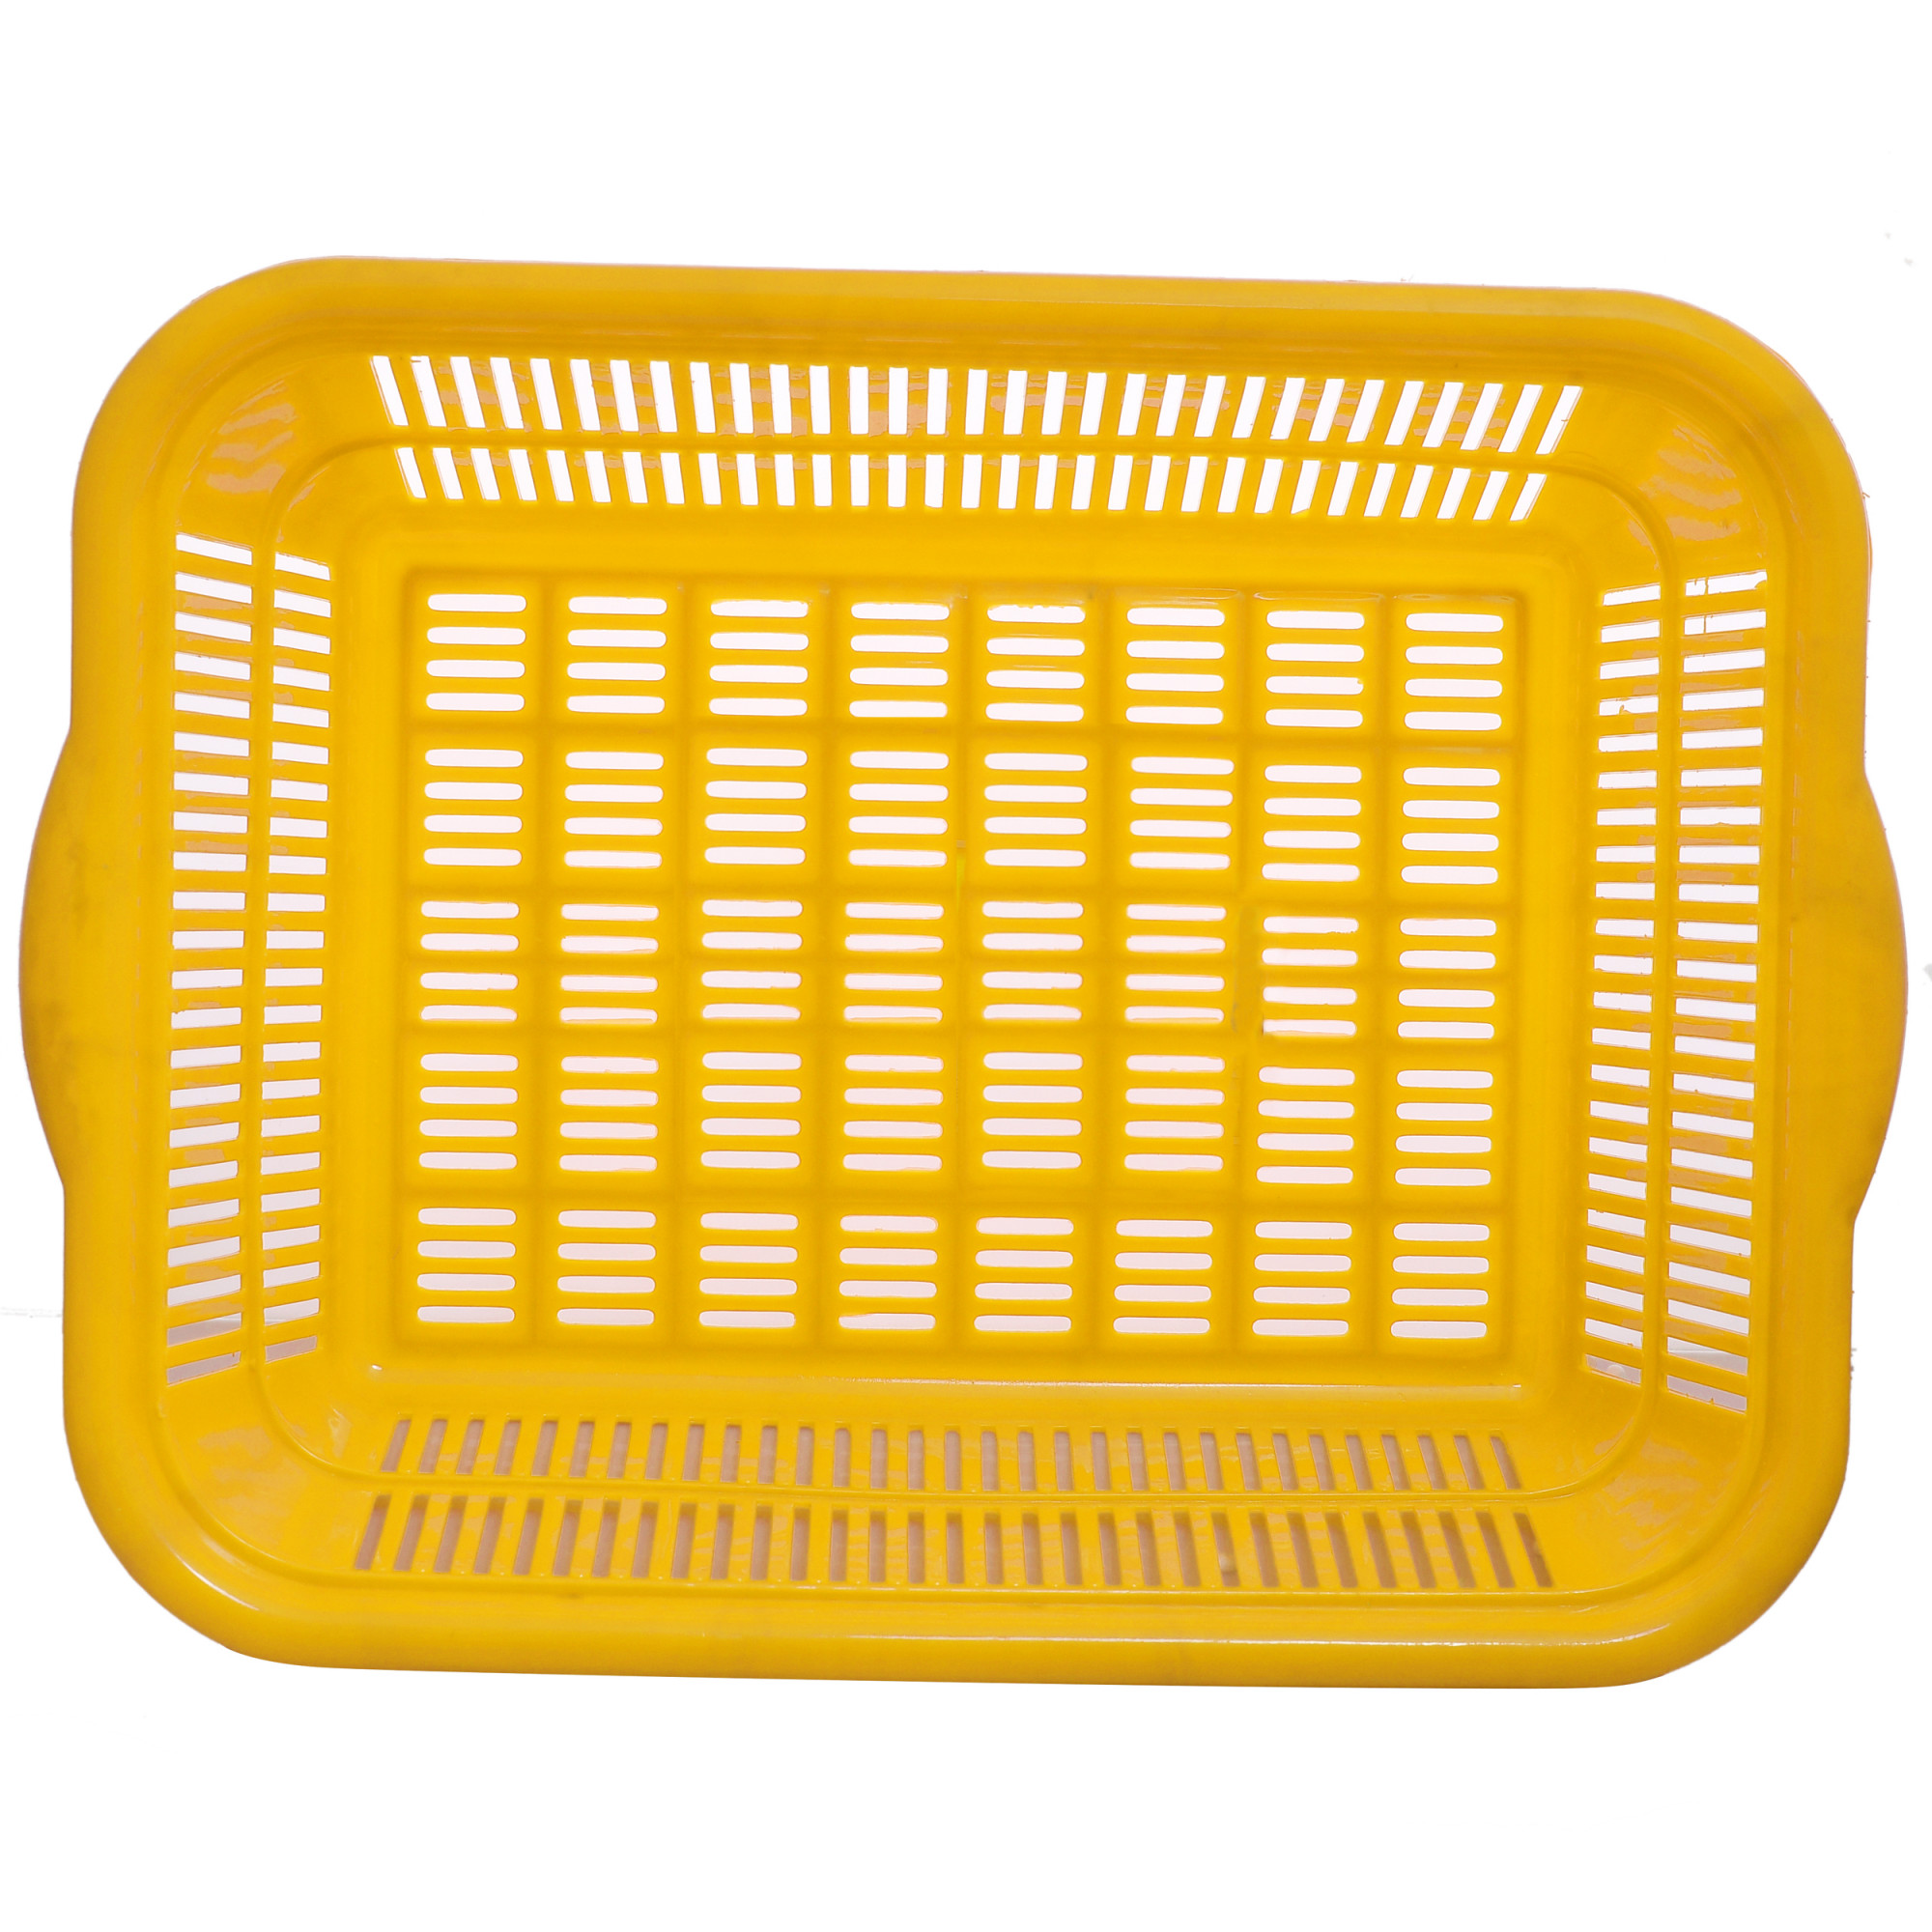 Kuber Industries 2 Pieces Plastic Kitchen Dish Rack Drainer Vegetables And Fruits Basket Dish Rack Multipurpose Organizers ,Large Size,Red & Yellow